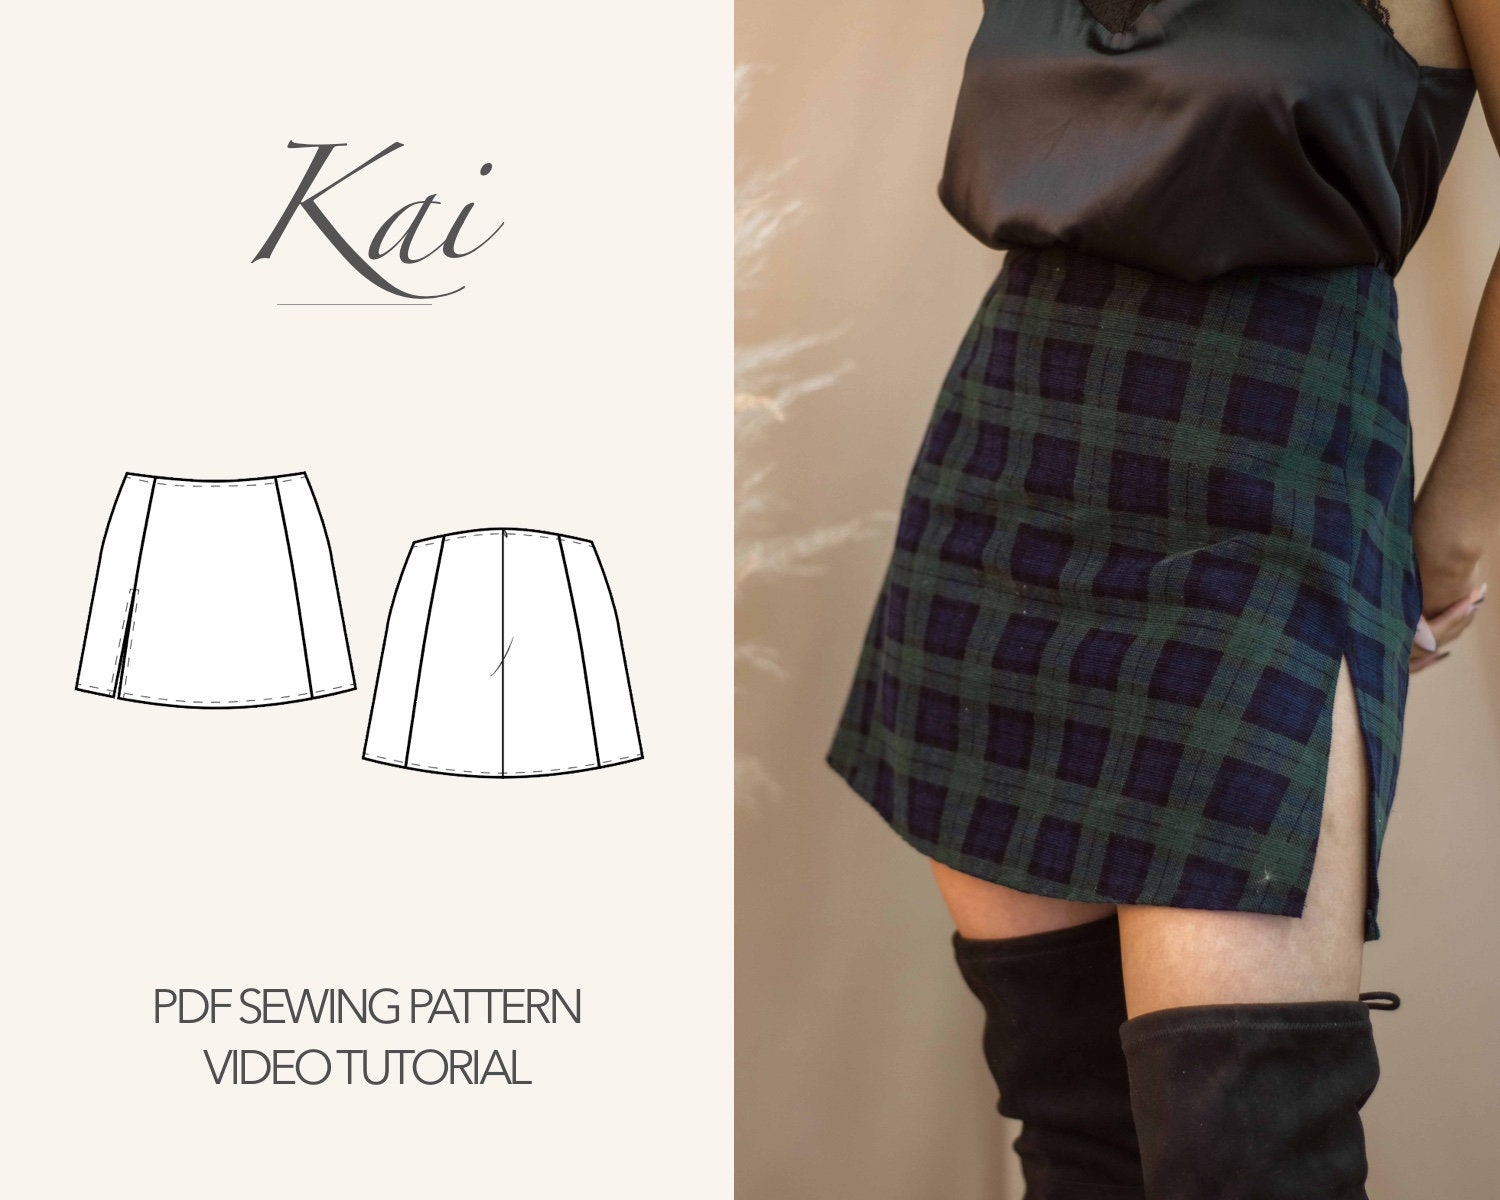 Learn how to sew a split hem with this quick video tutorial.